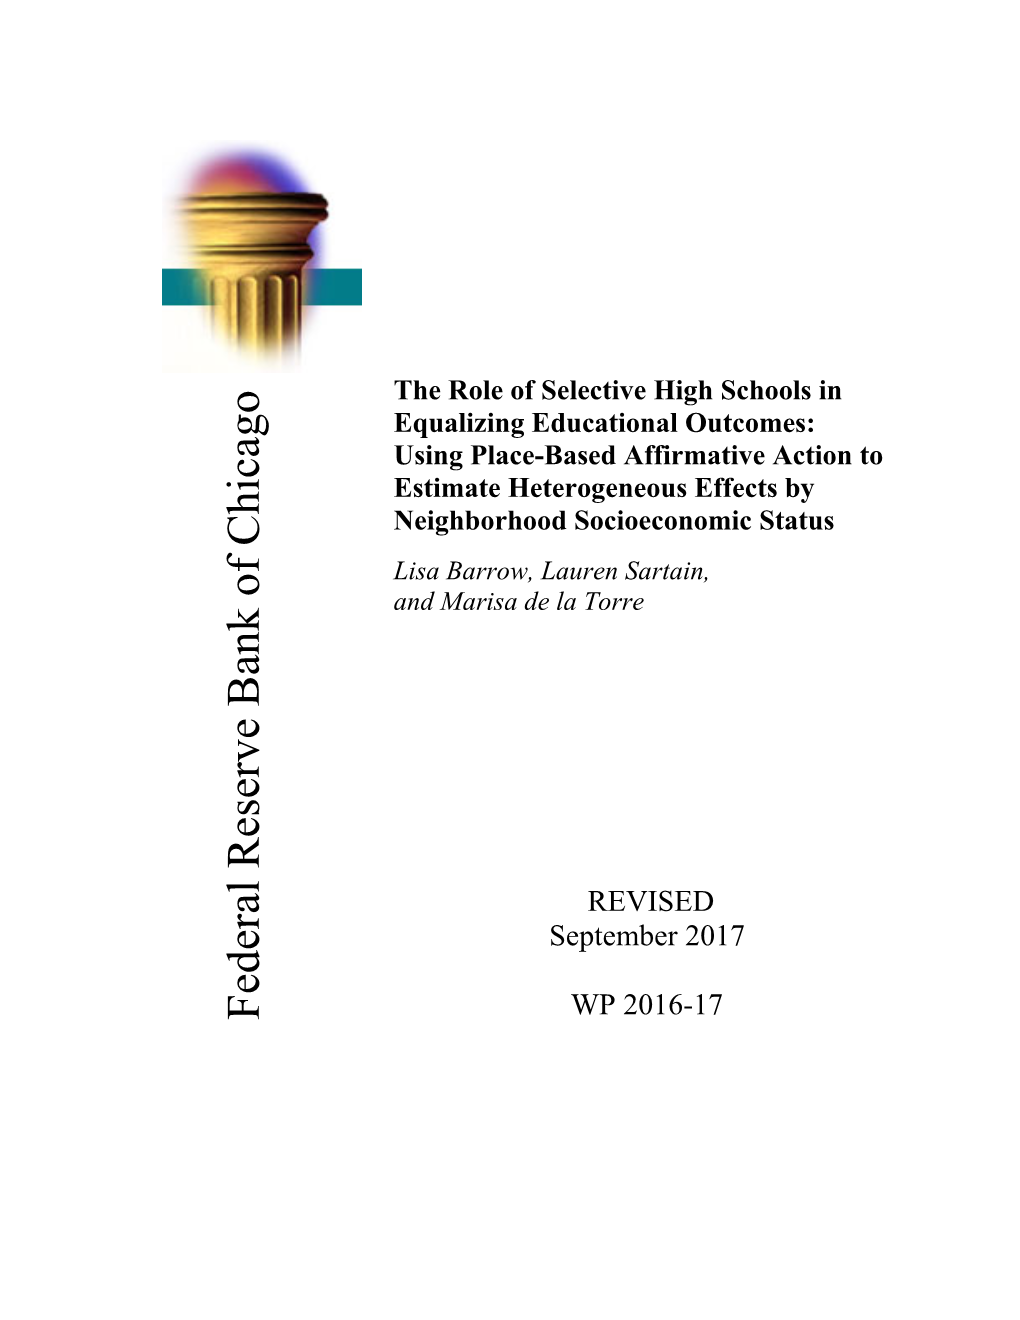 The Role of Selective High Schools in Equalizing Educational Outcomes